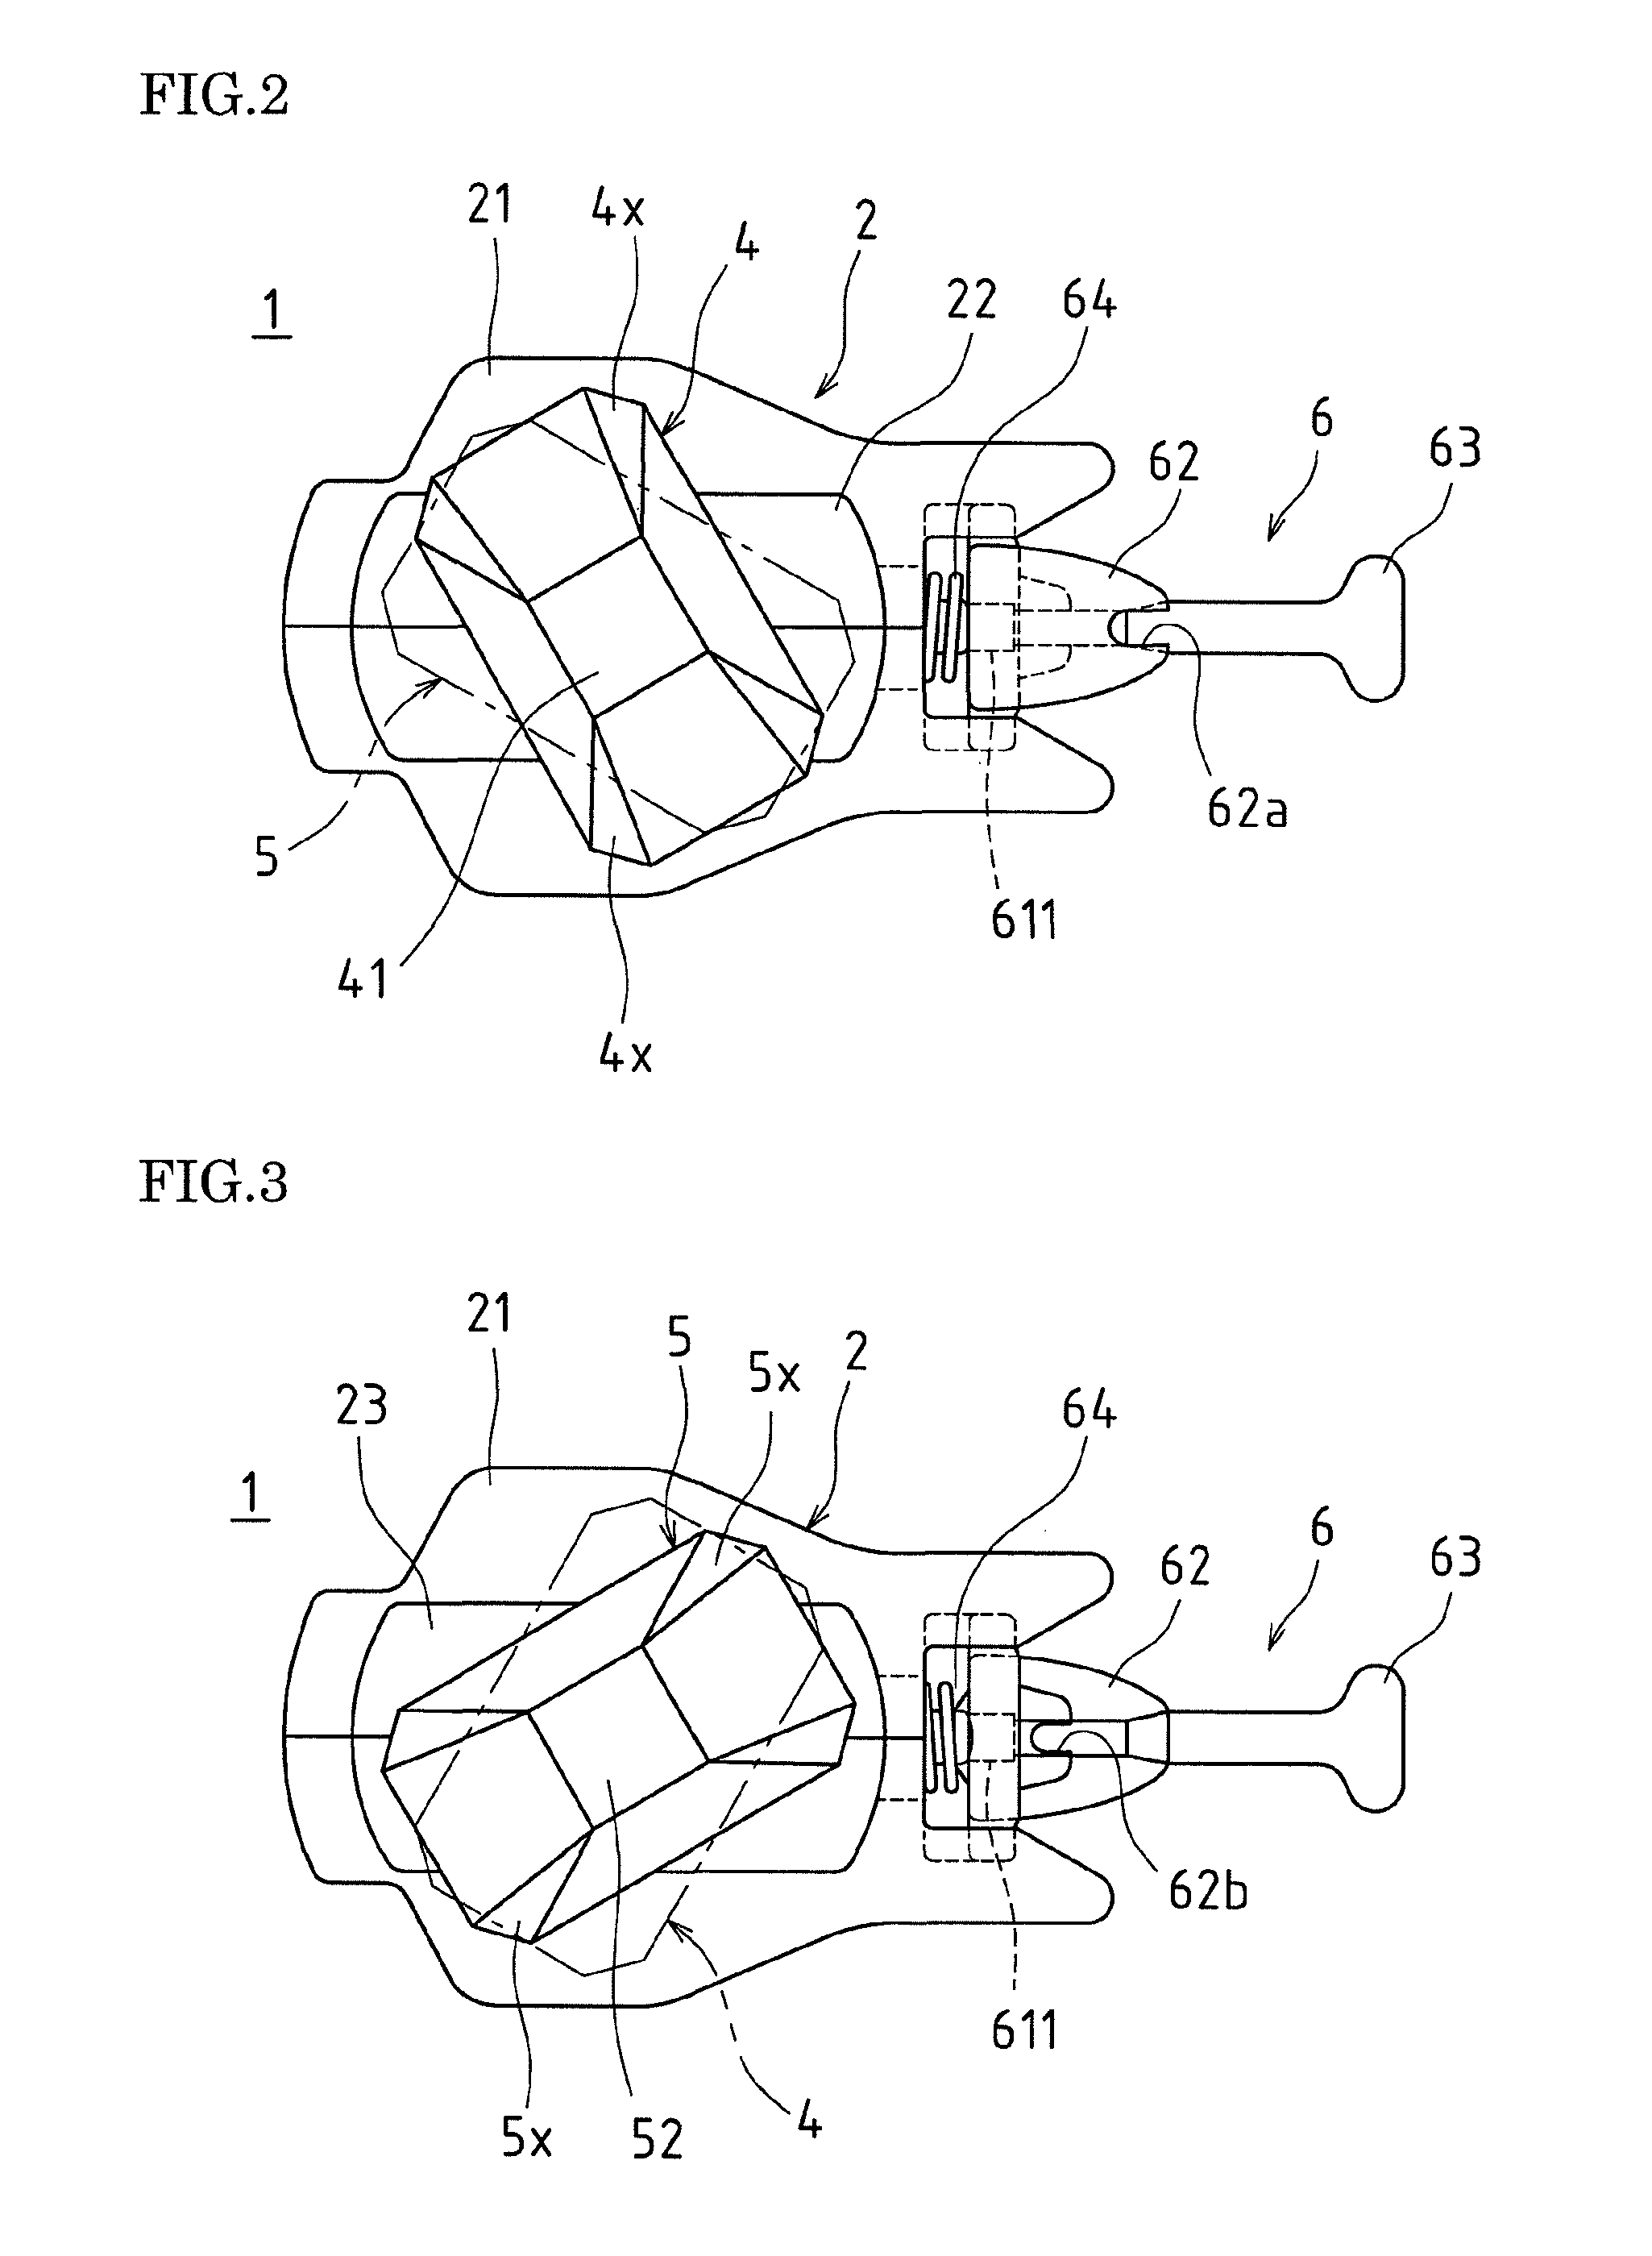 Container coupling device